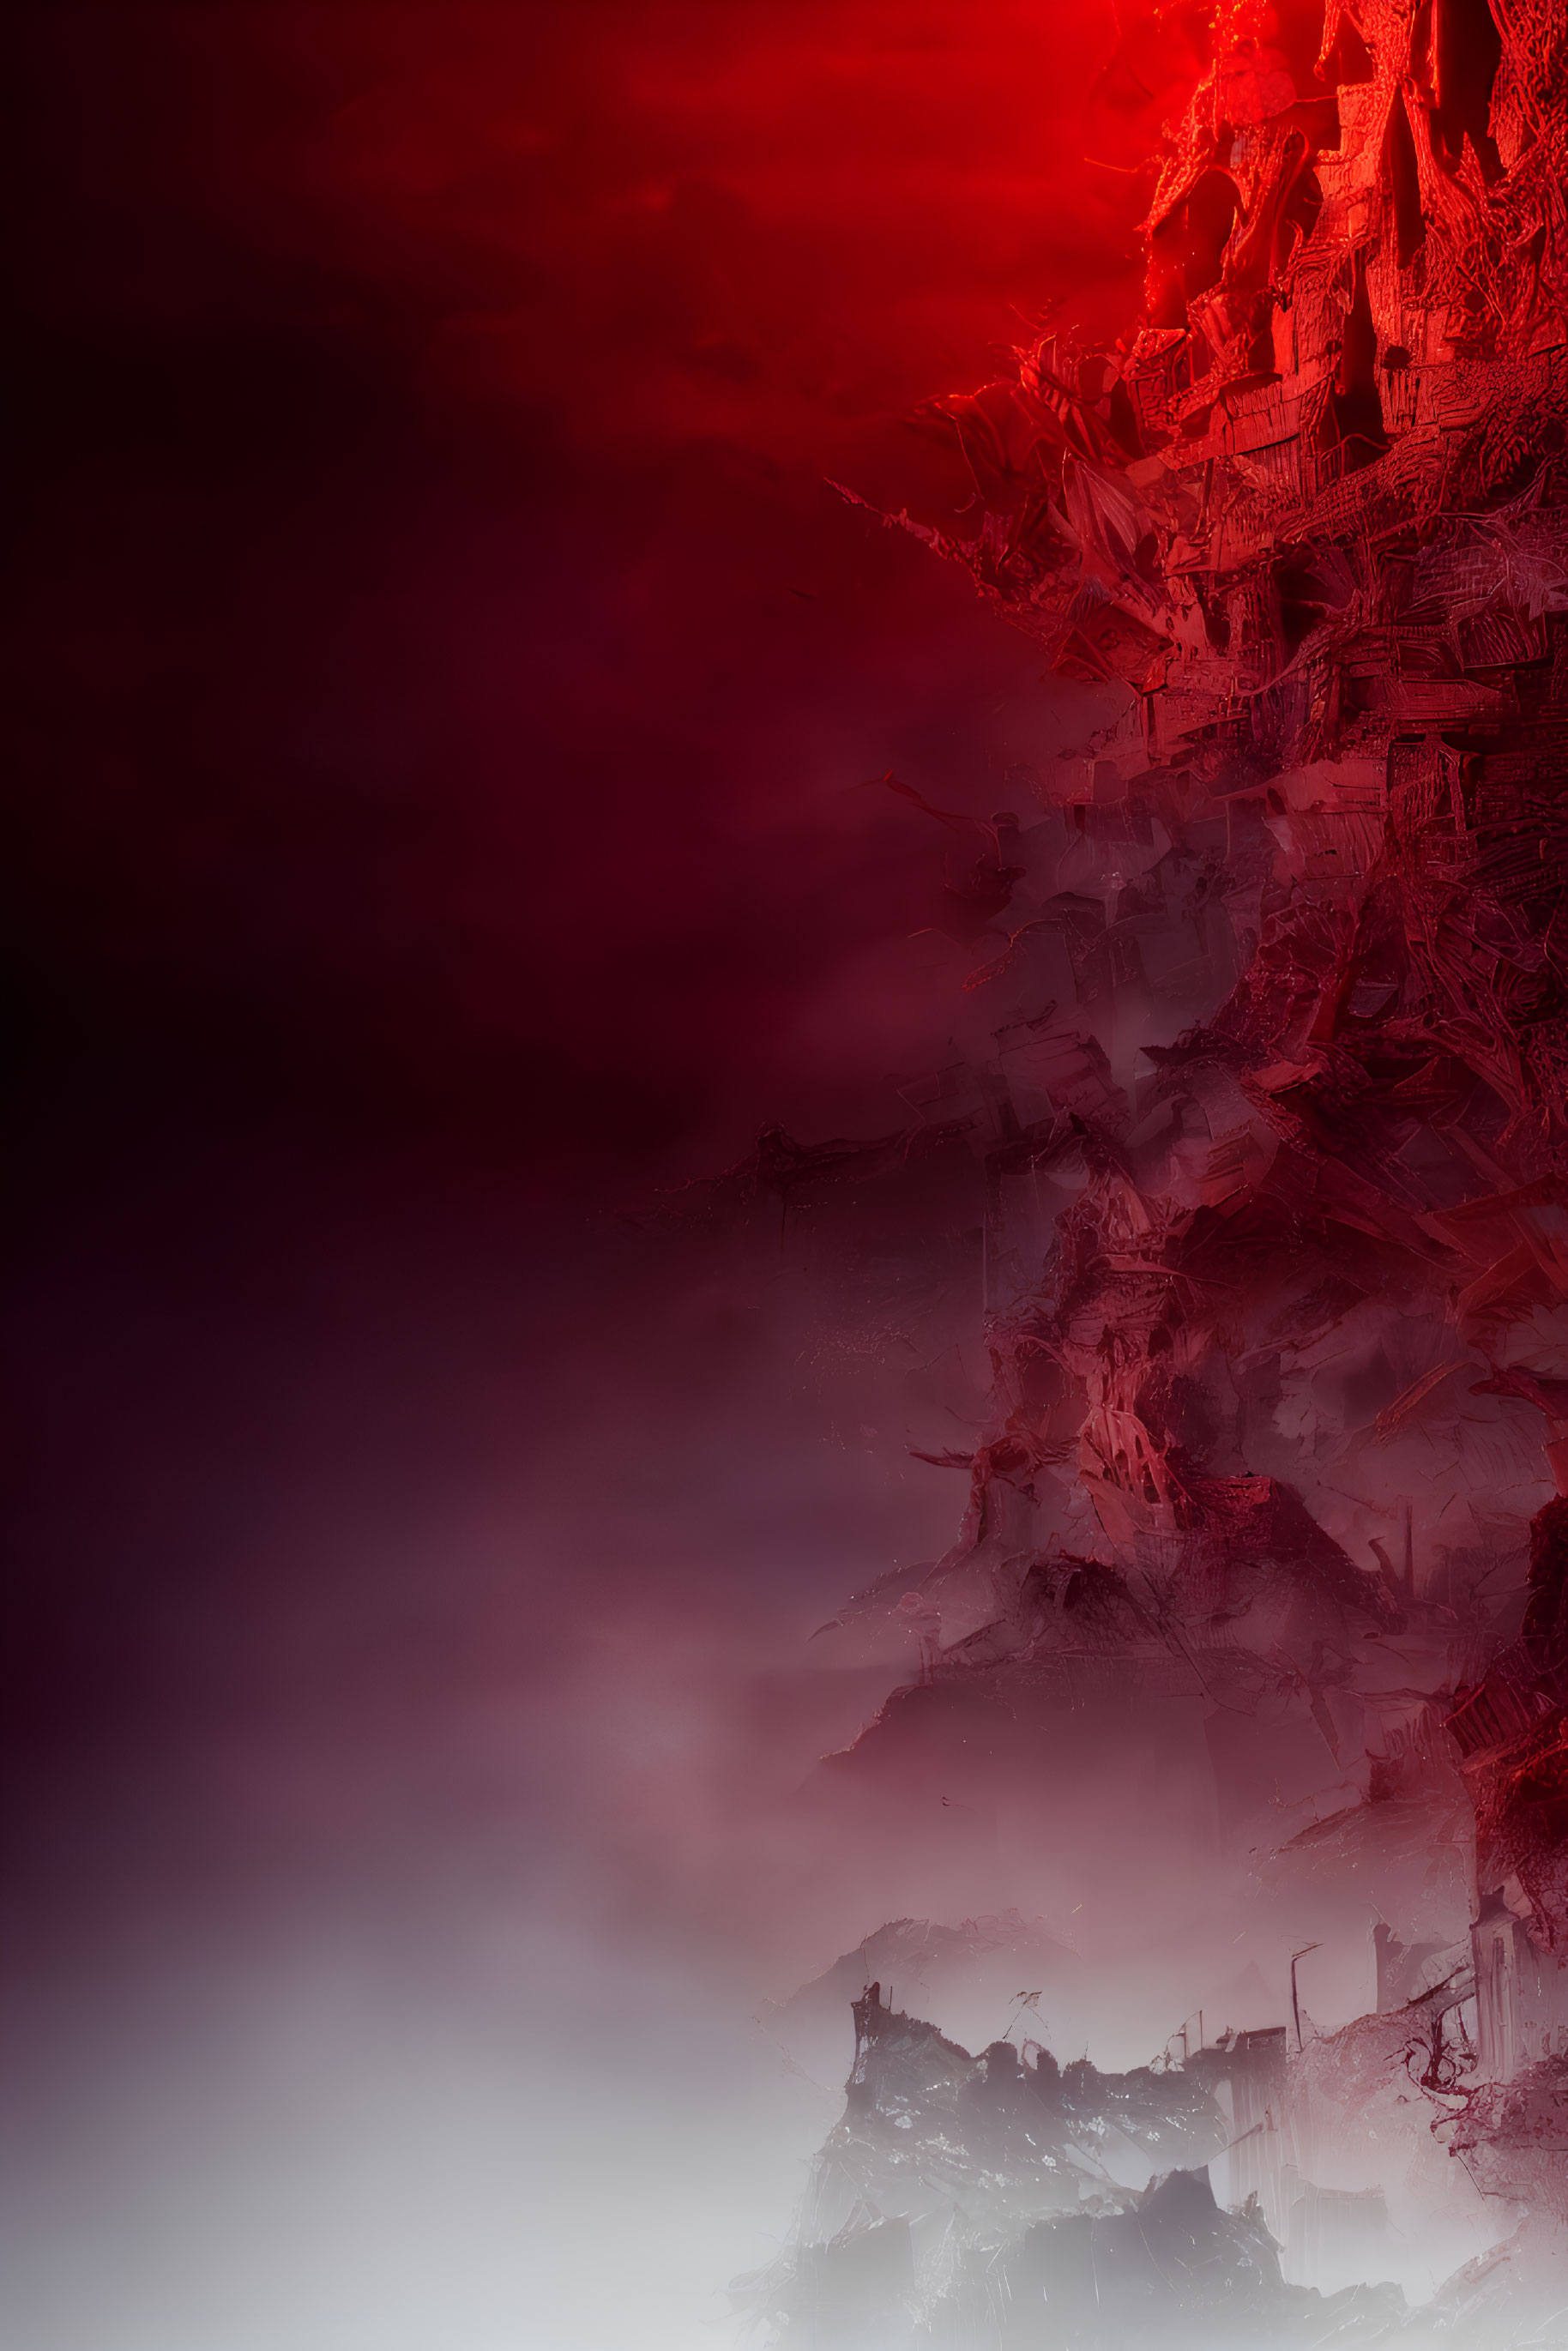 Abstract Image: Deep Reds and Purples with Chaotic Textured Patterns